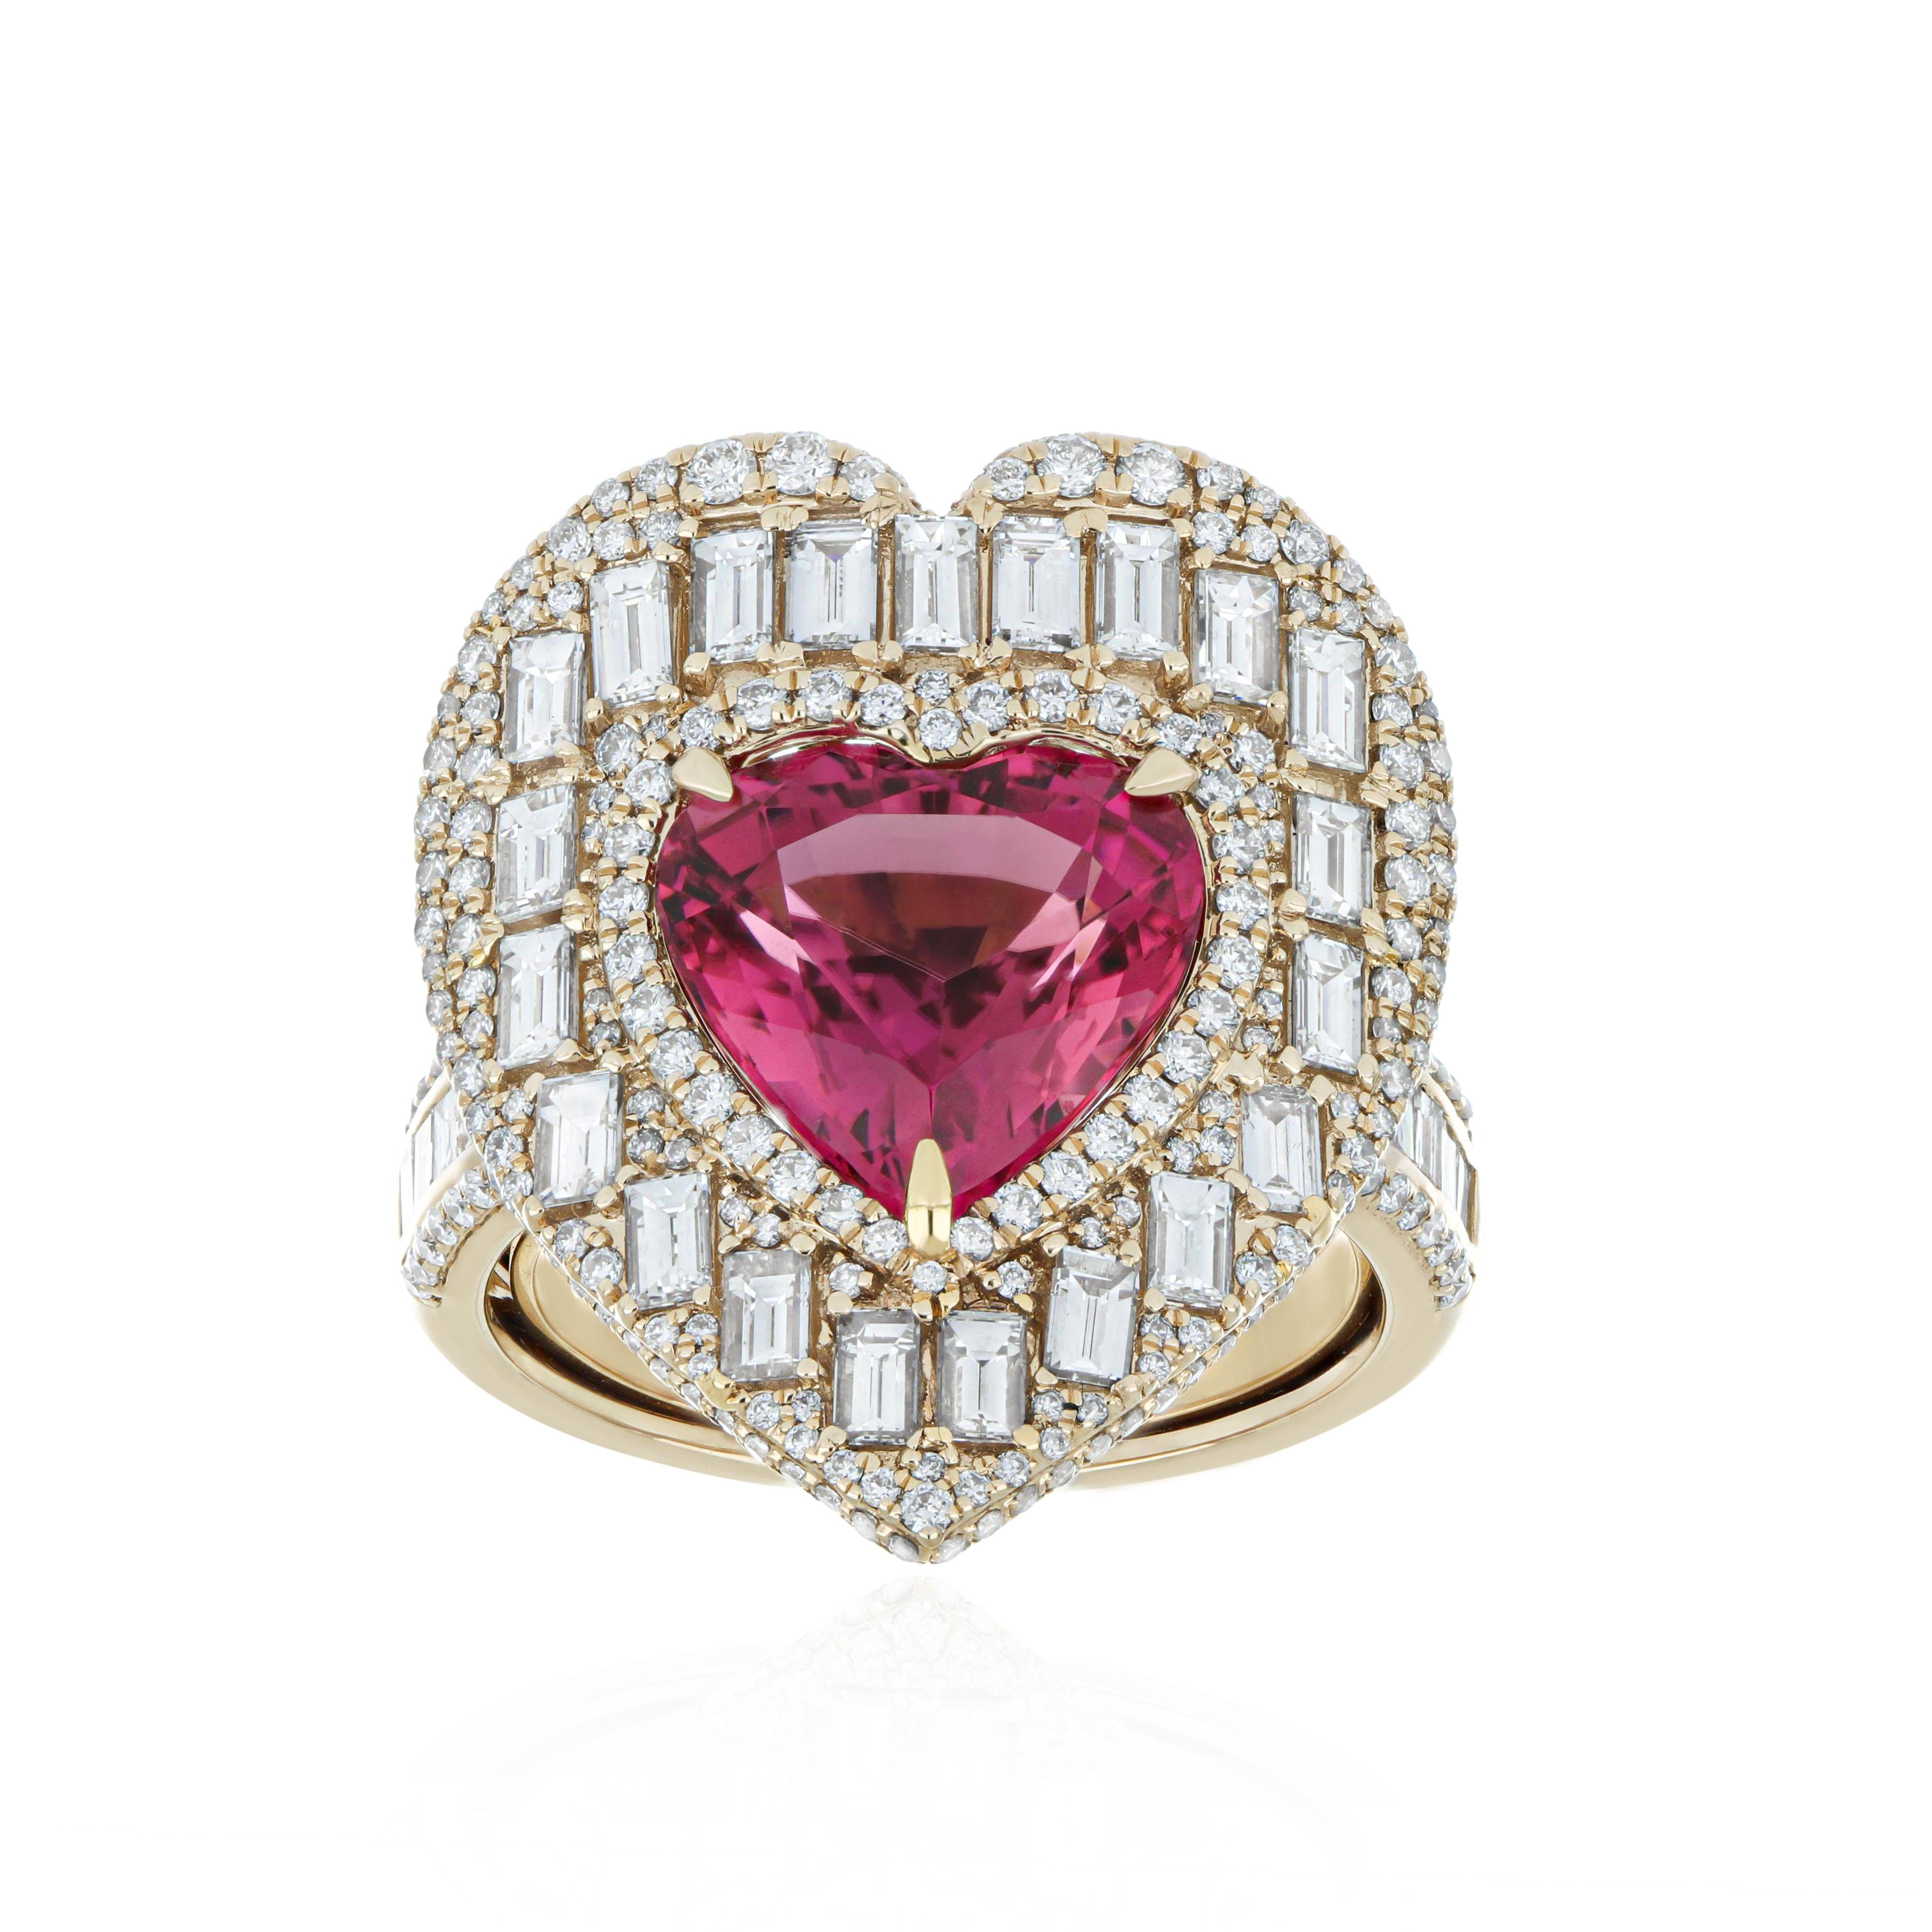 Elegant and exquisitely detailed 18K Yellow Gold Ring, with 4.9 Cts Heart Shape Rubellite set in center and Surrounded by Micro pave Diamonds, weighing approx. 3.35 CT's. total carat weight to further enhance the beauty of the ring. Beautifully Hand